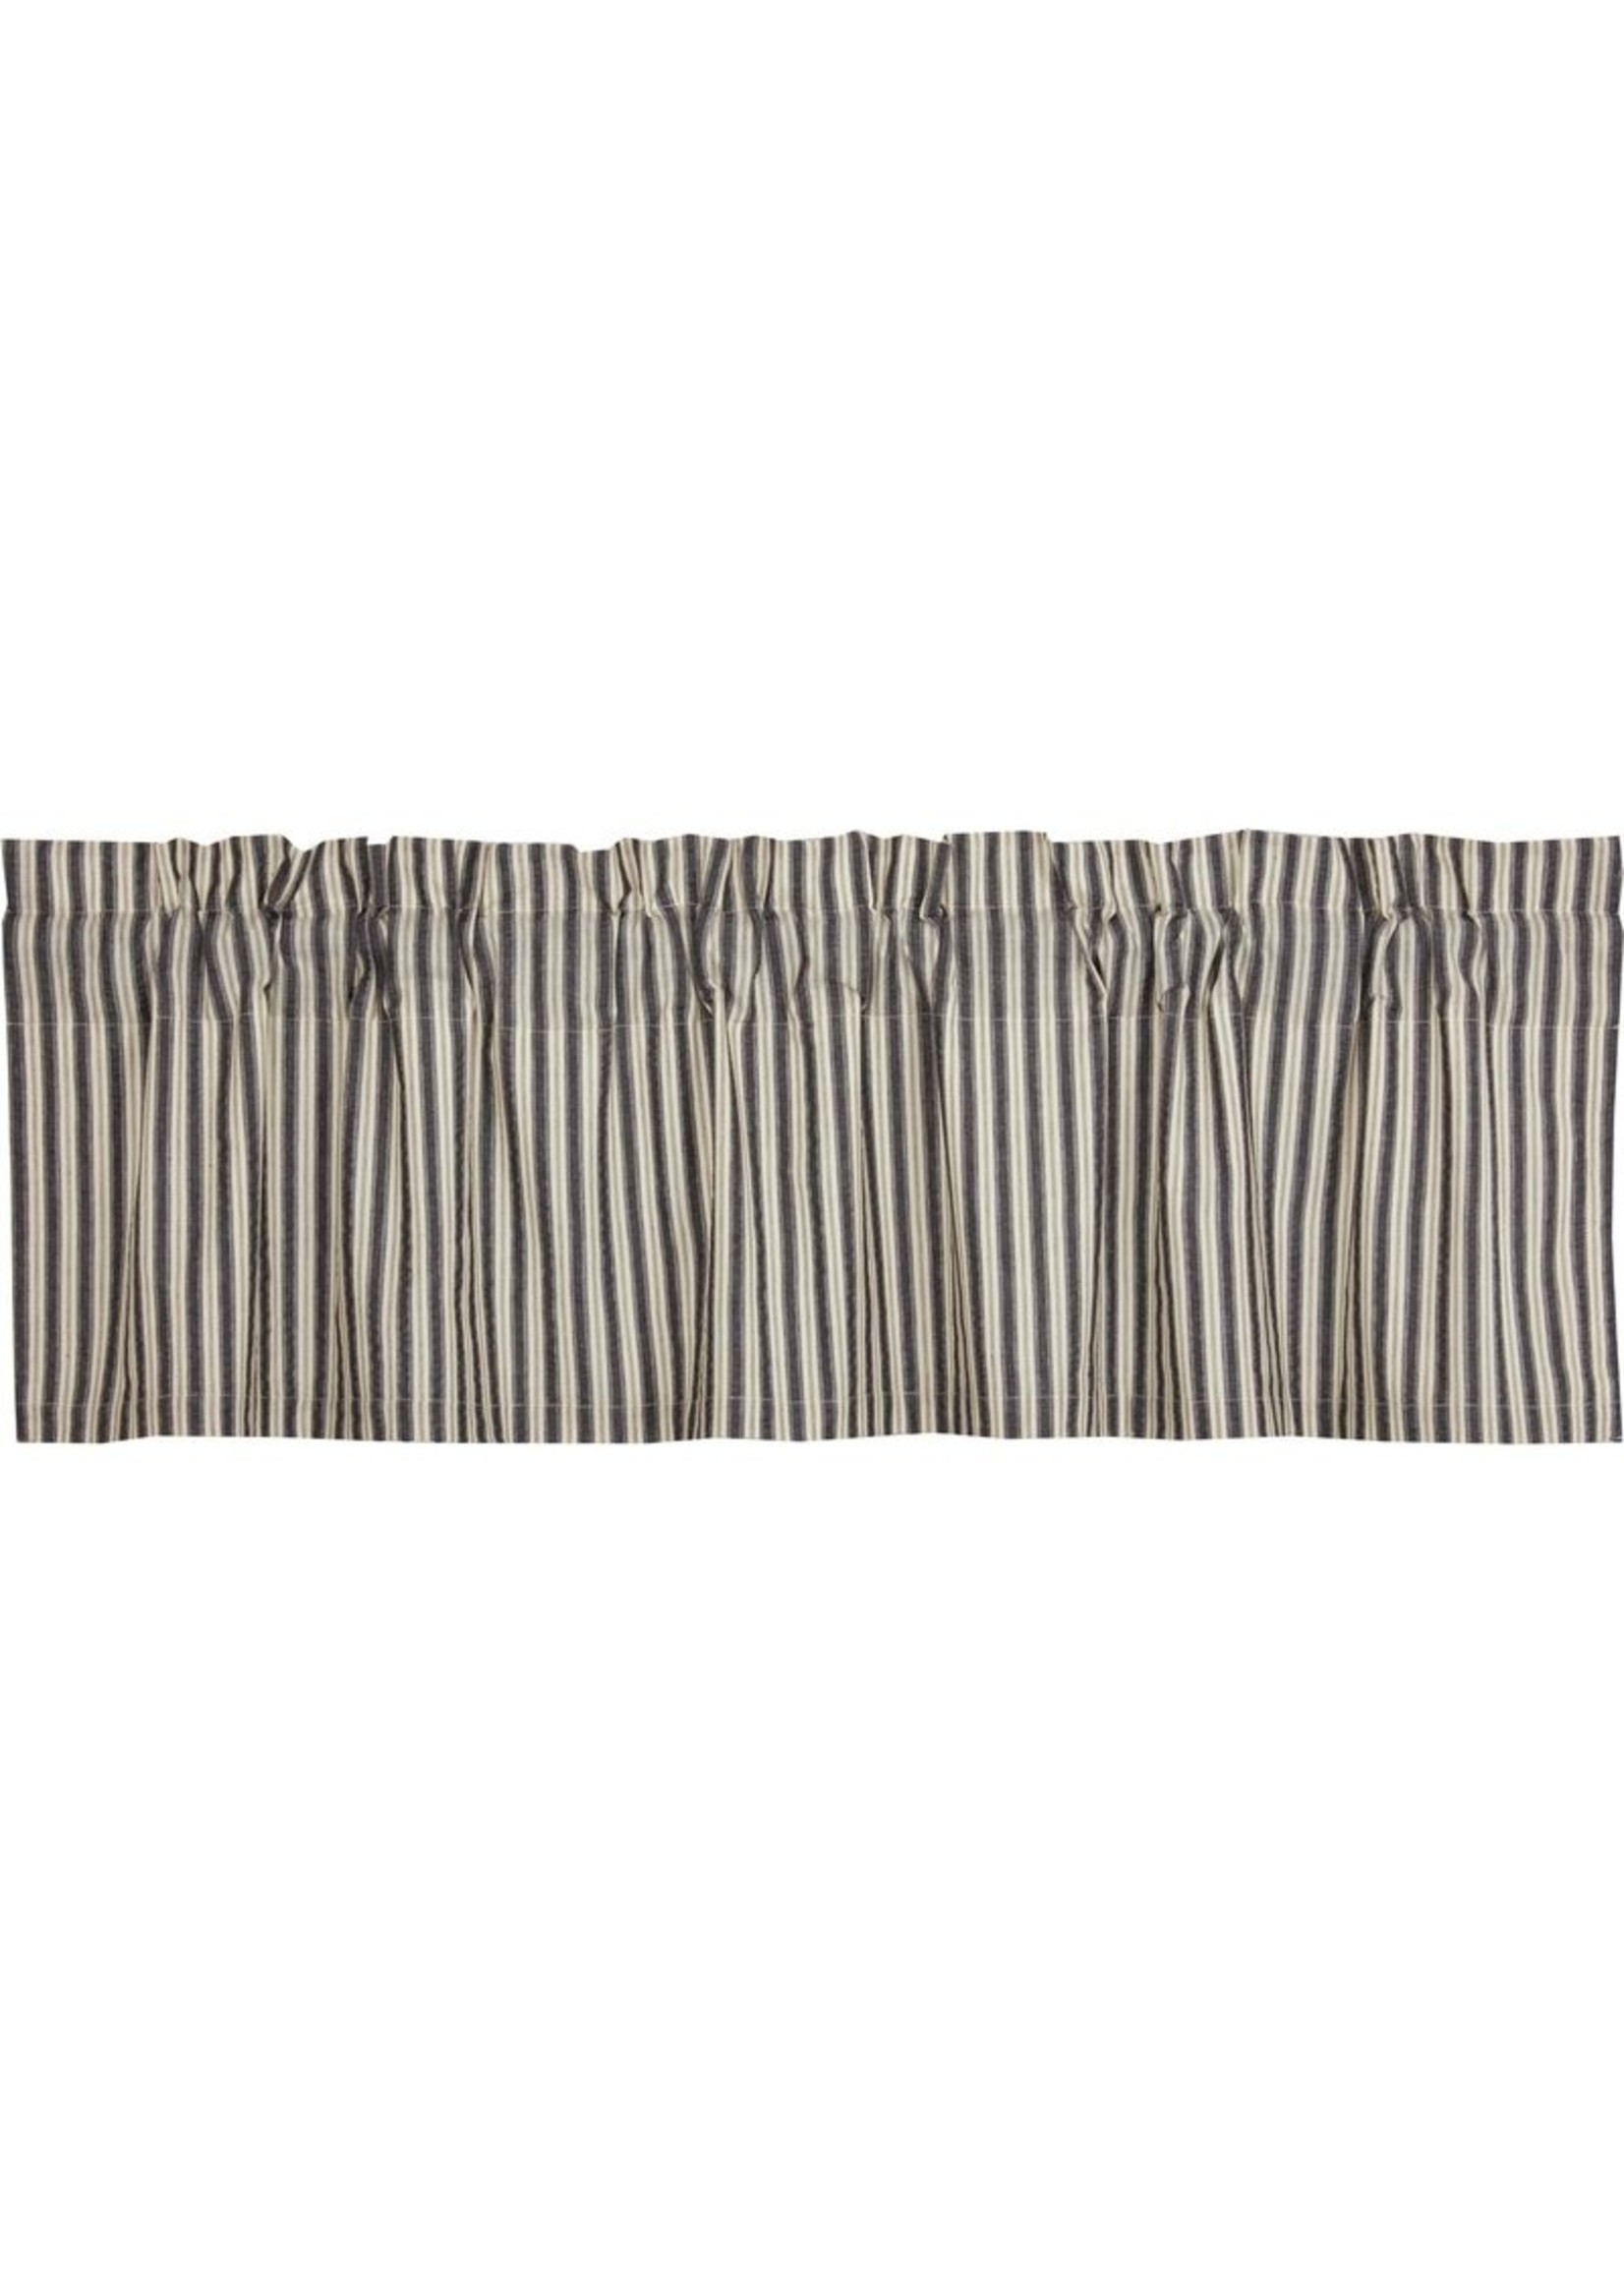 *16" x 60" Dian Striped Cotton Tailored Window Valance in Charcoal Grey, Warm Grey, Vintage White